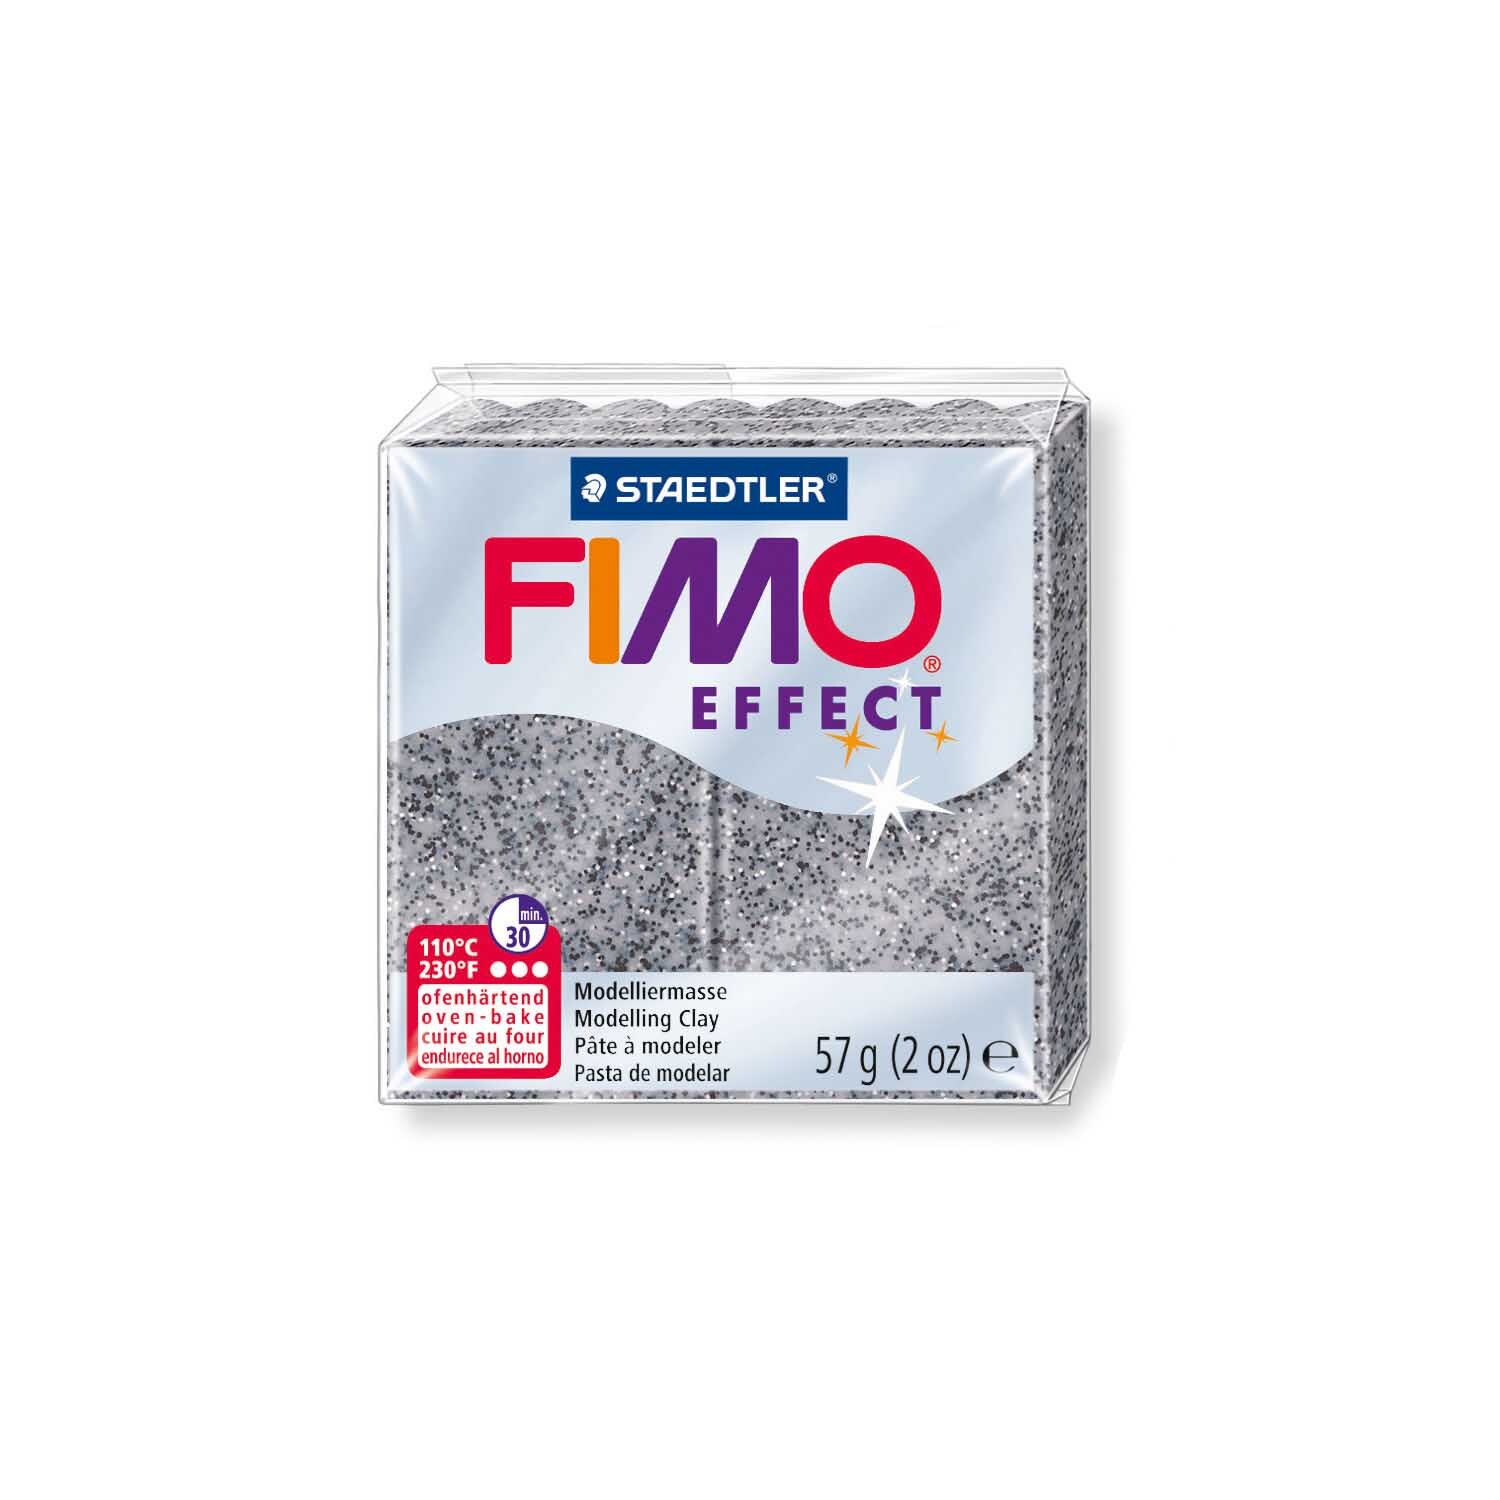 FIMO effect 57g